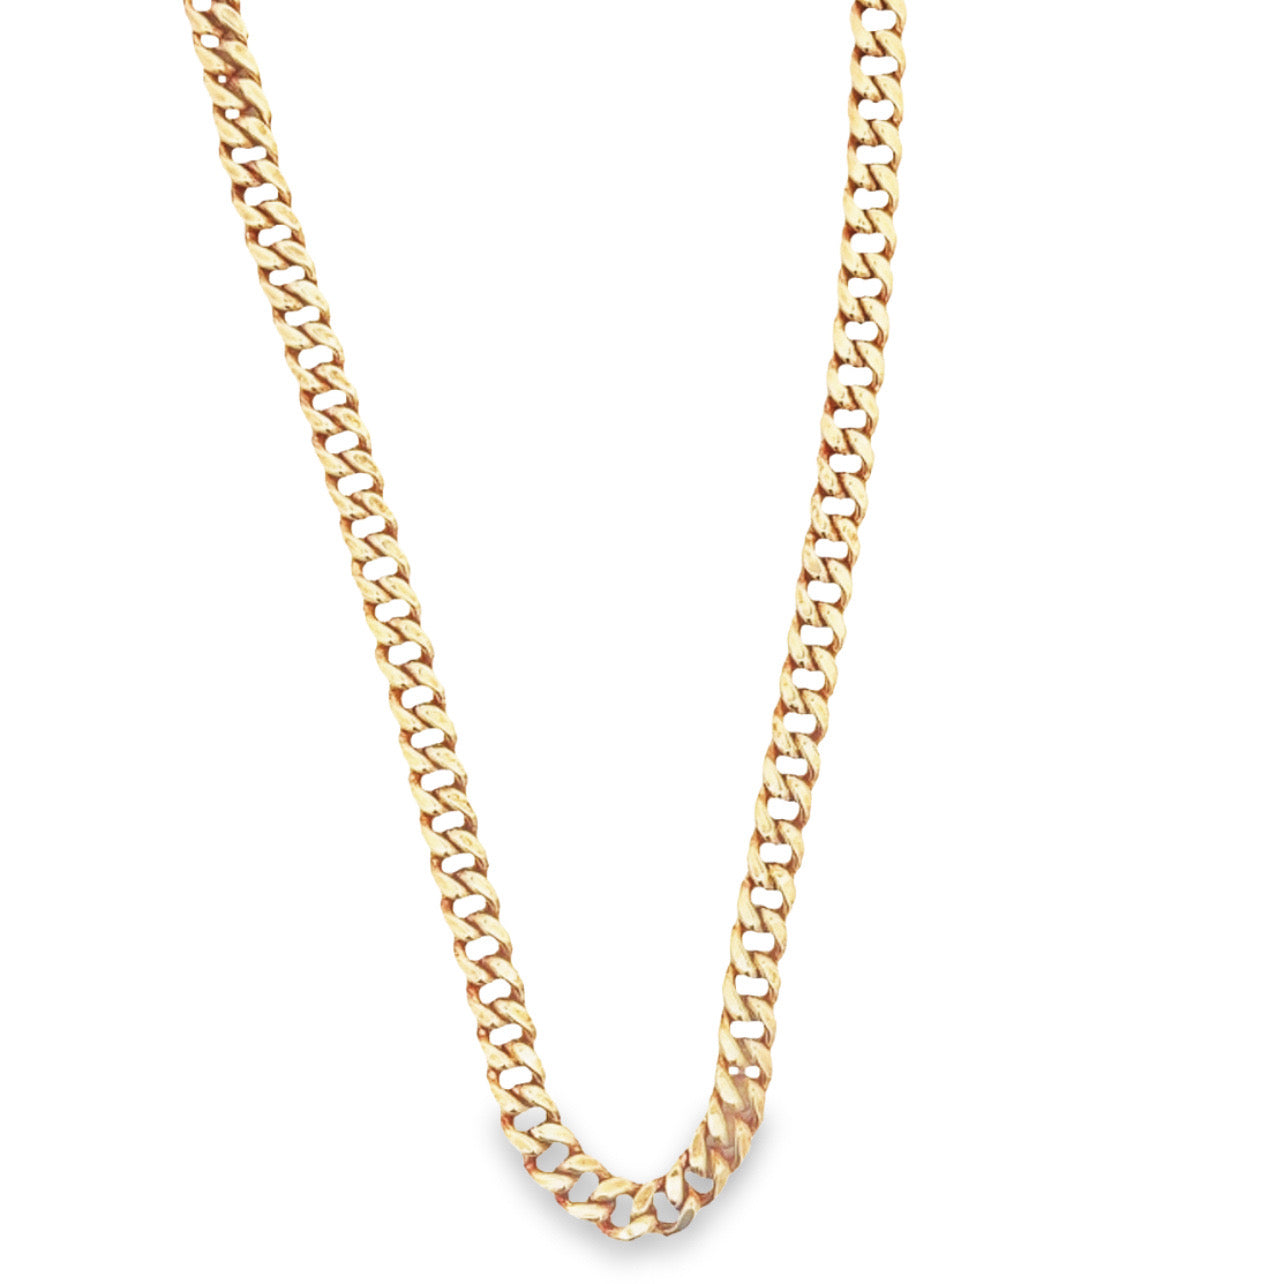 14K Gold Cuban Chain 6mm | Luby Gold Collection | Luby 